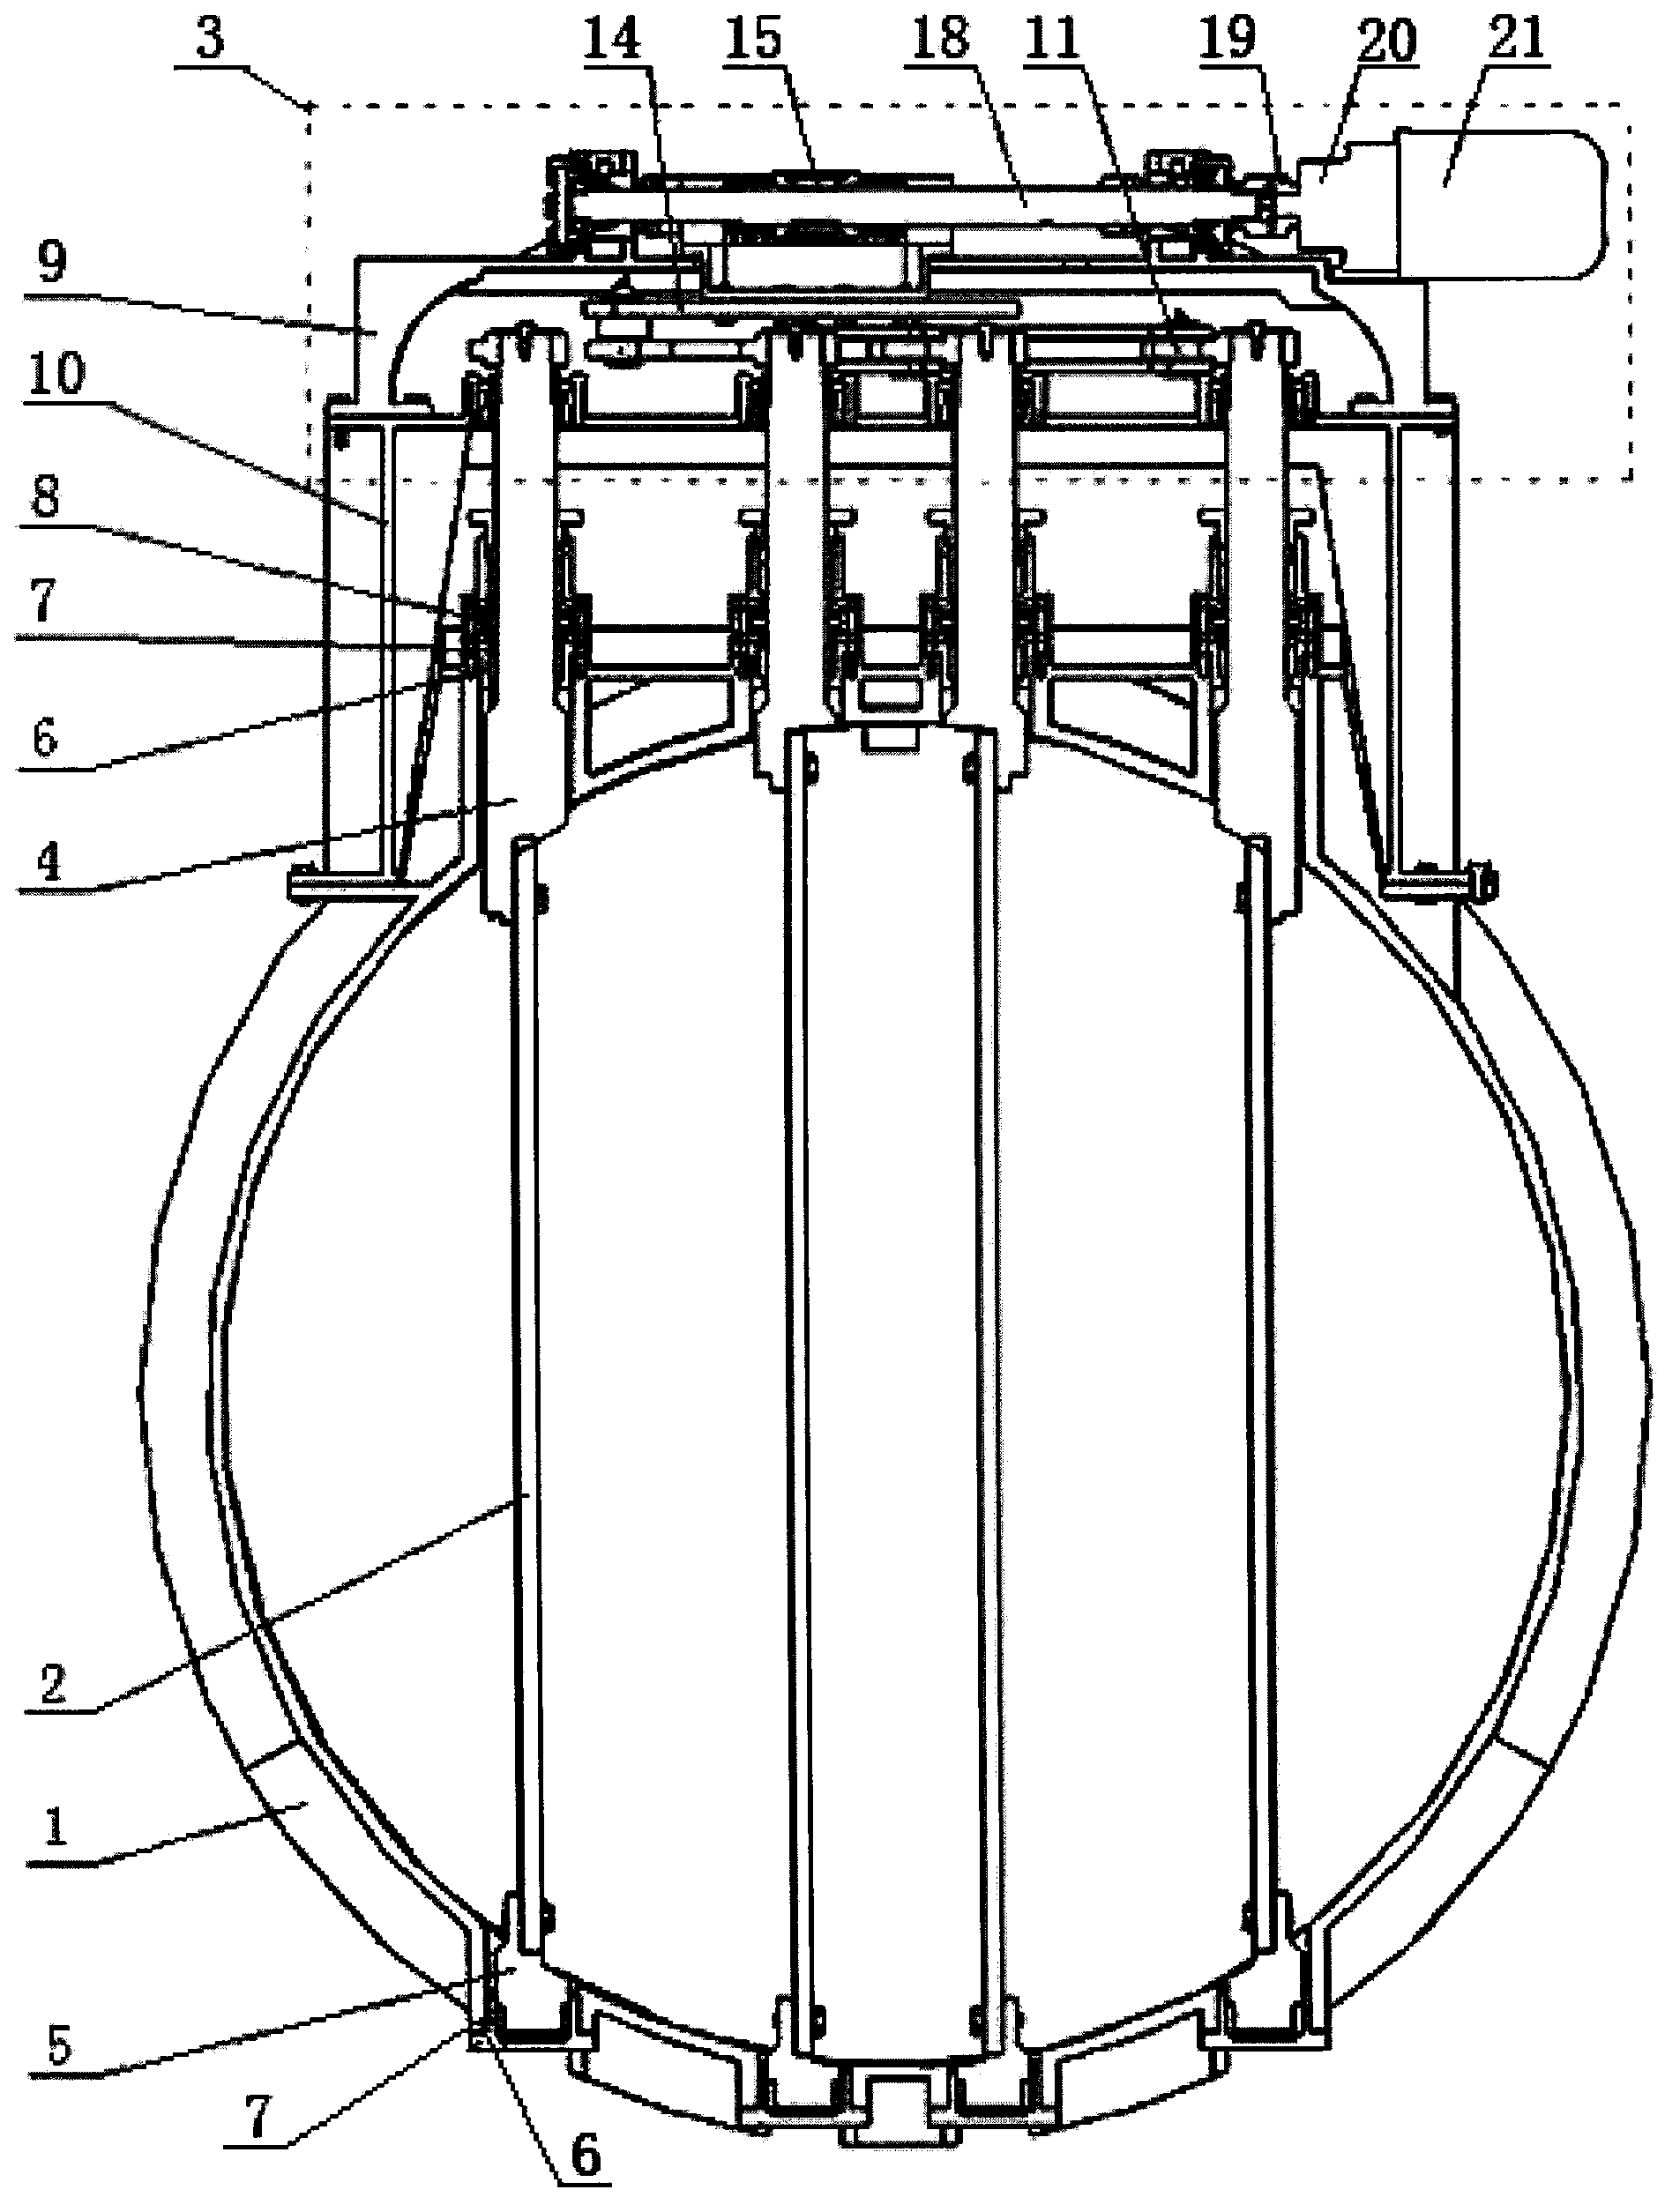 Capping device of conduit mouth of ship body